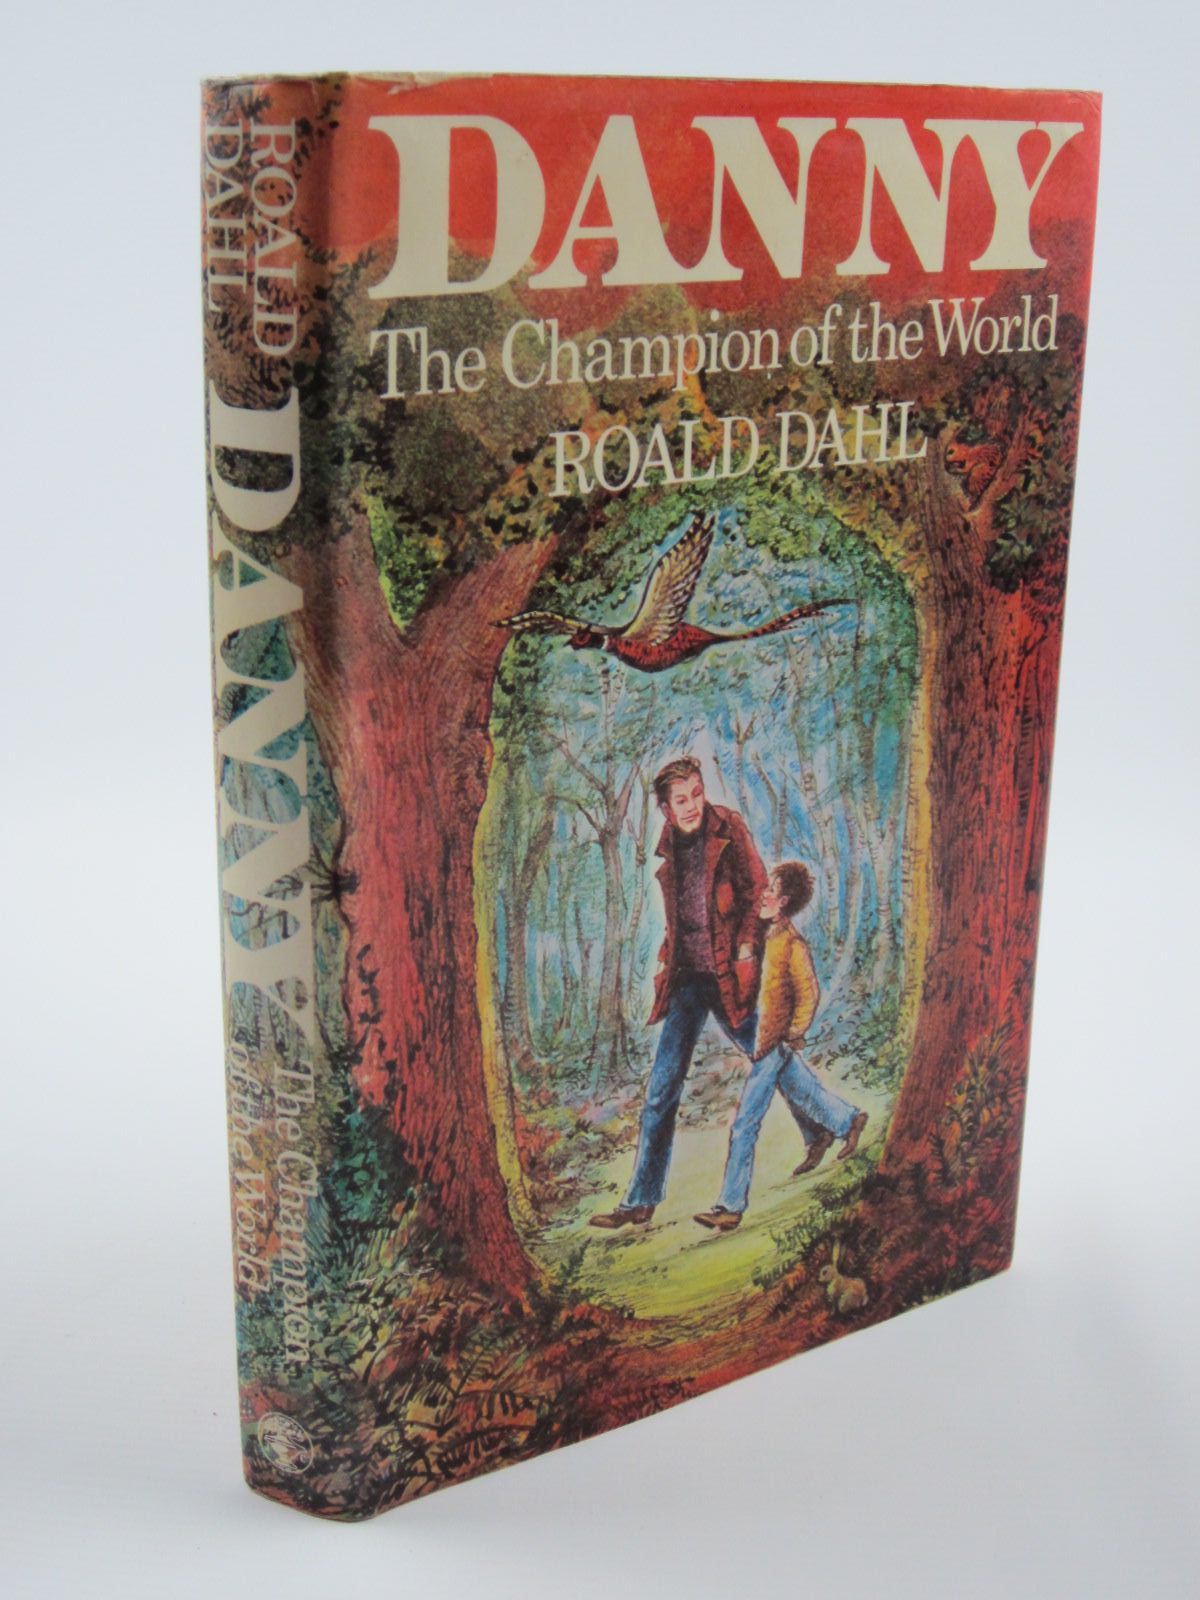 Cover of DANNY THE CHAMPION OF THE WORLD by Roald Dahl